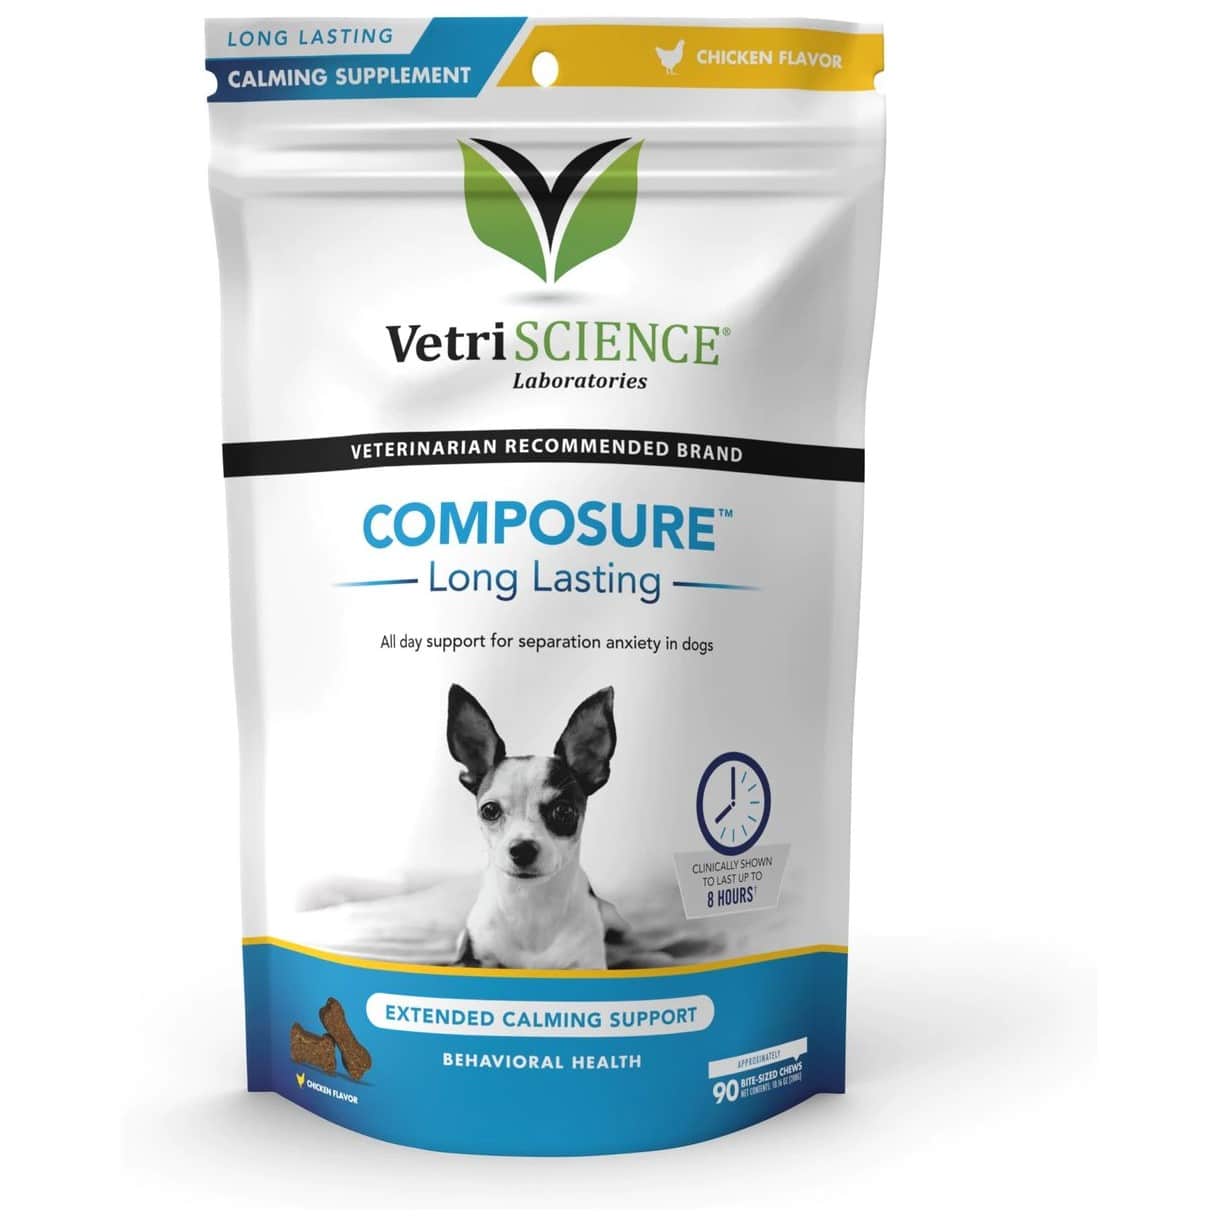 VetriScience Composure Long Lasting Chicken Flavored Calming Supplement for Dogs